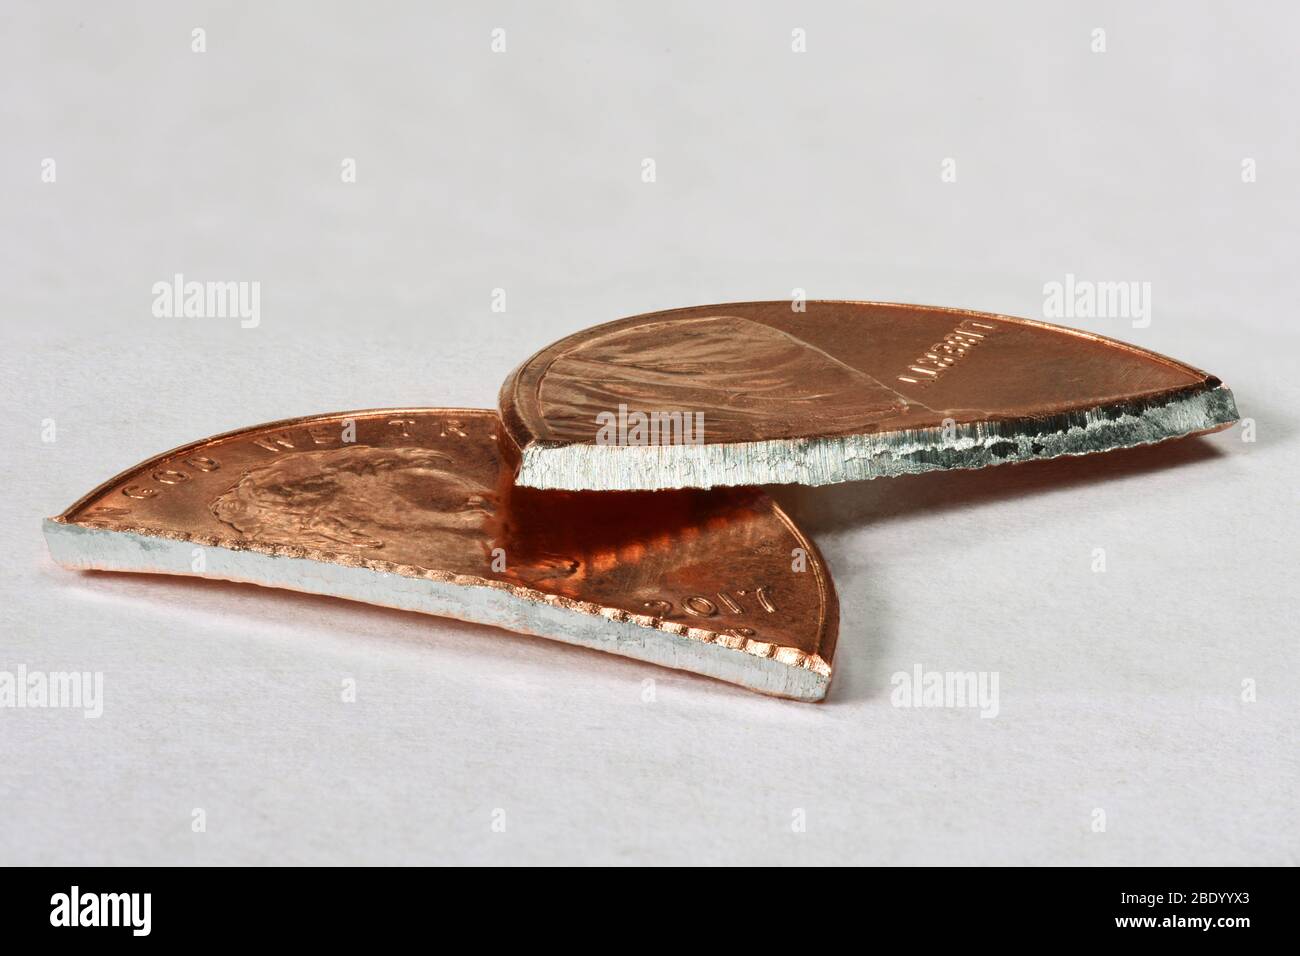 Cut Penny with Zinc Core Stock Photo